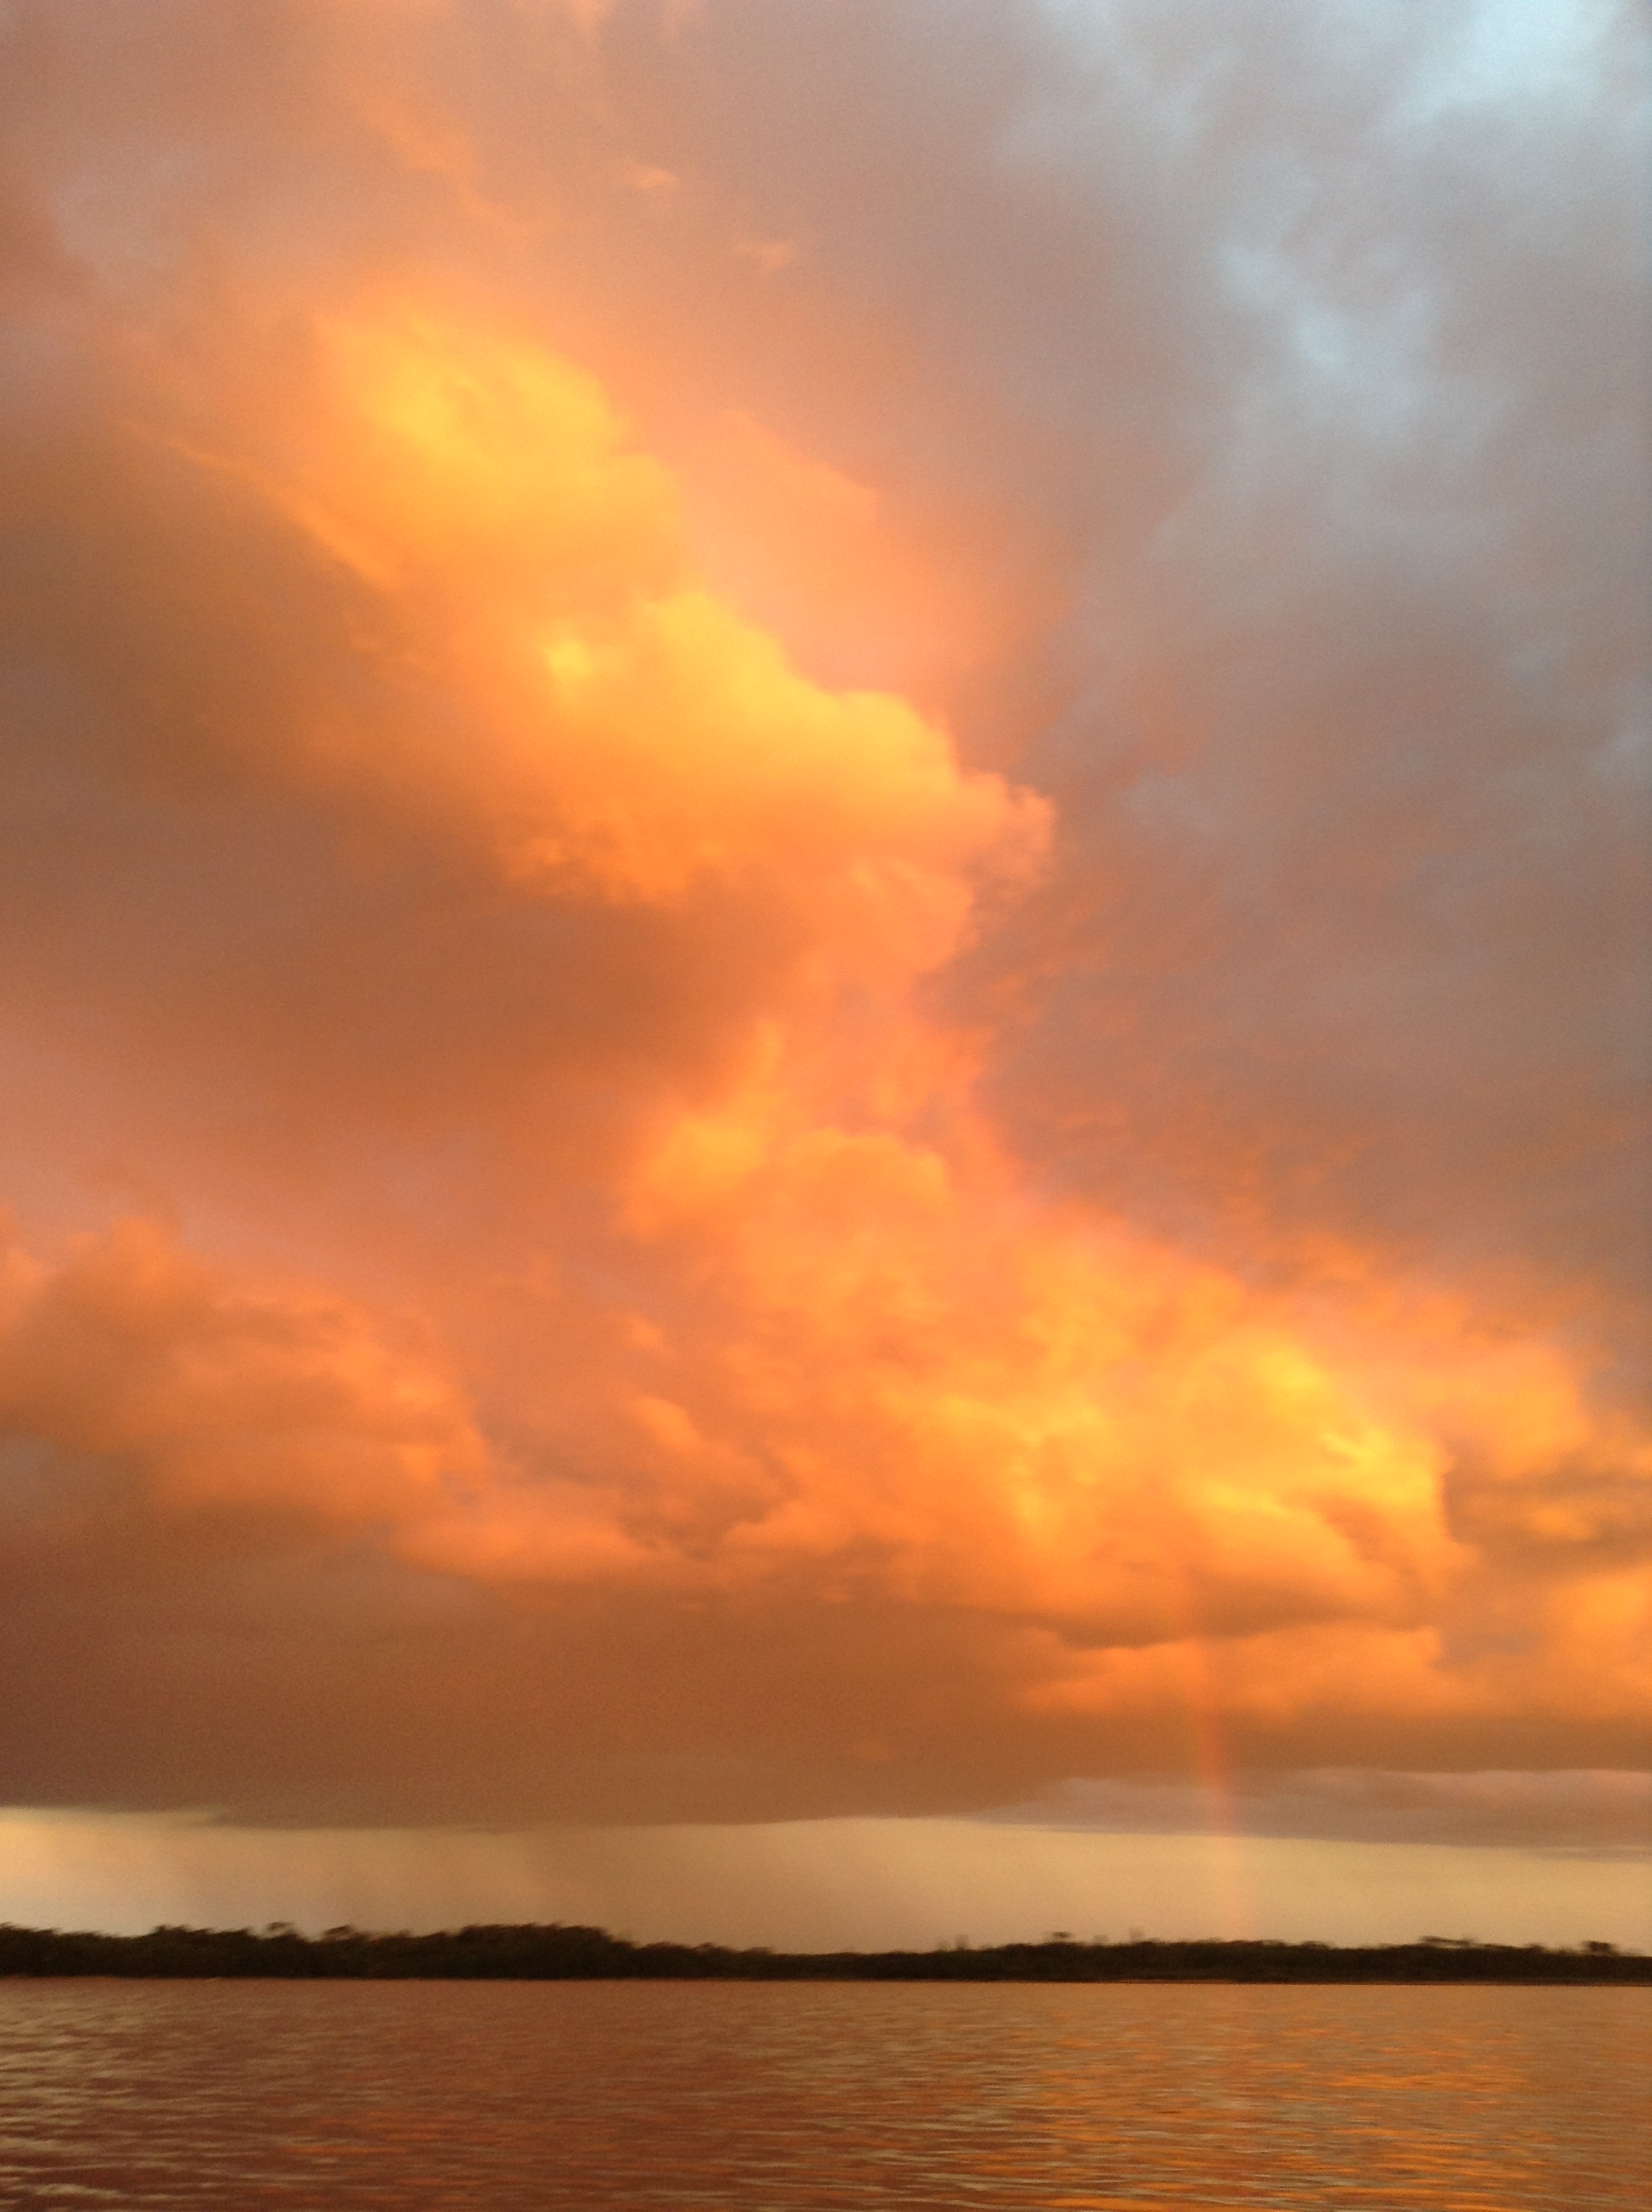 Sunset, Clouds and Rainbow, the beauty after the storm - RE Magazine